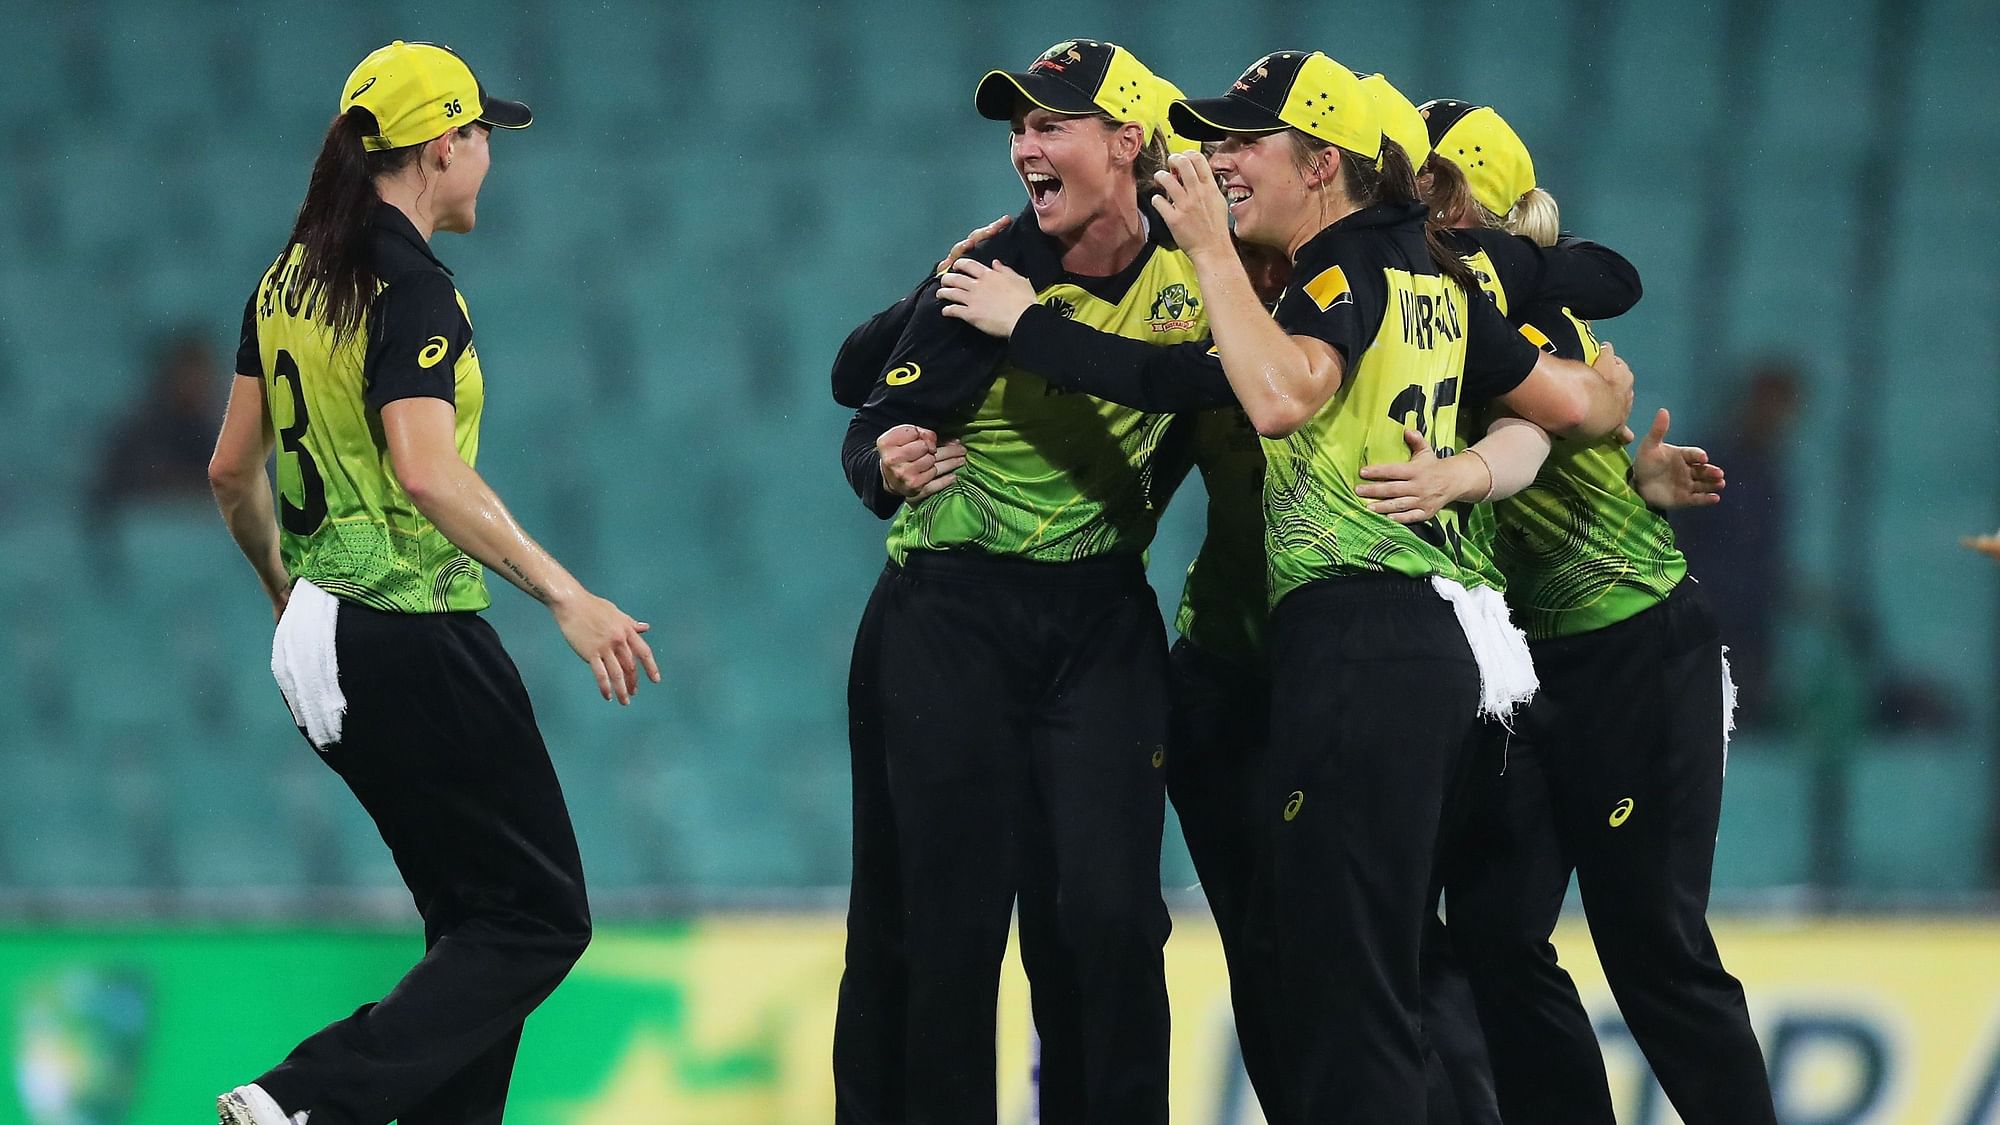 Australia advanced to their sixth successive final of the ICC Women’s T20 World Cup out of the seven editions held so far.